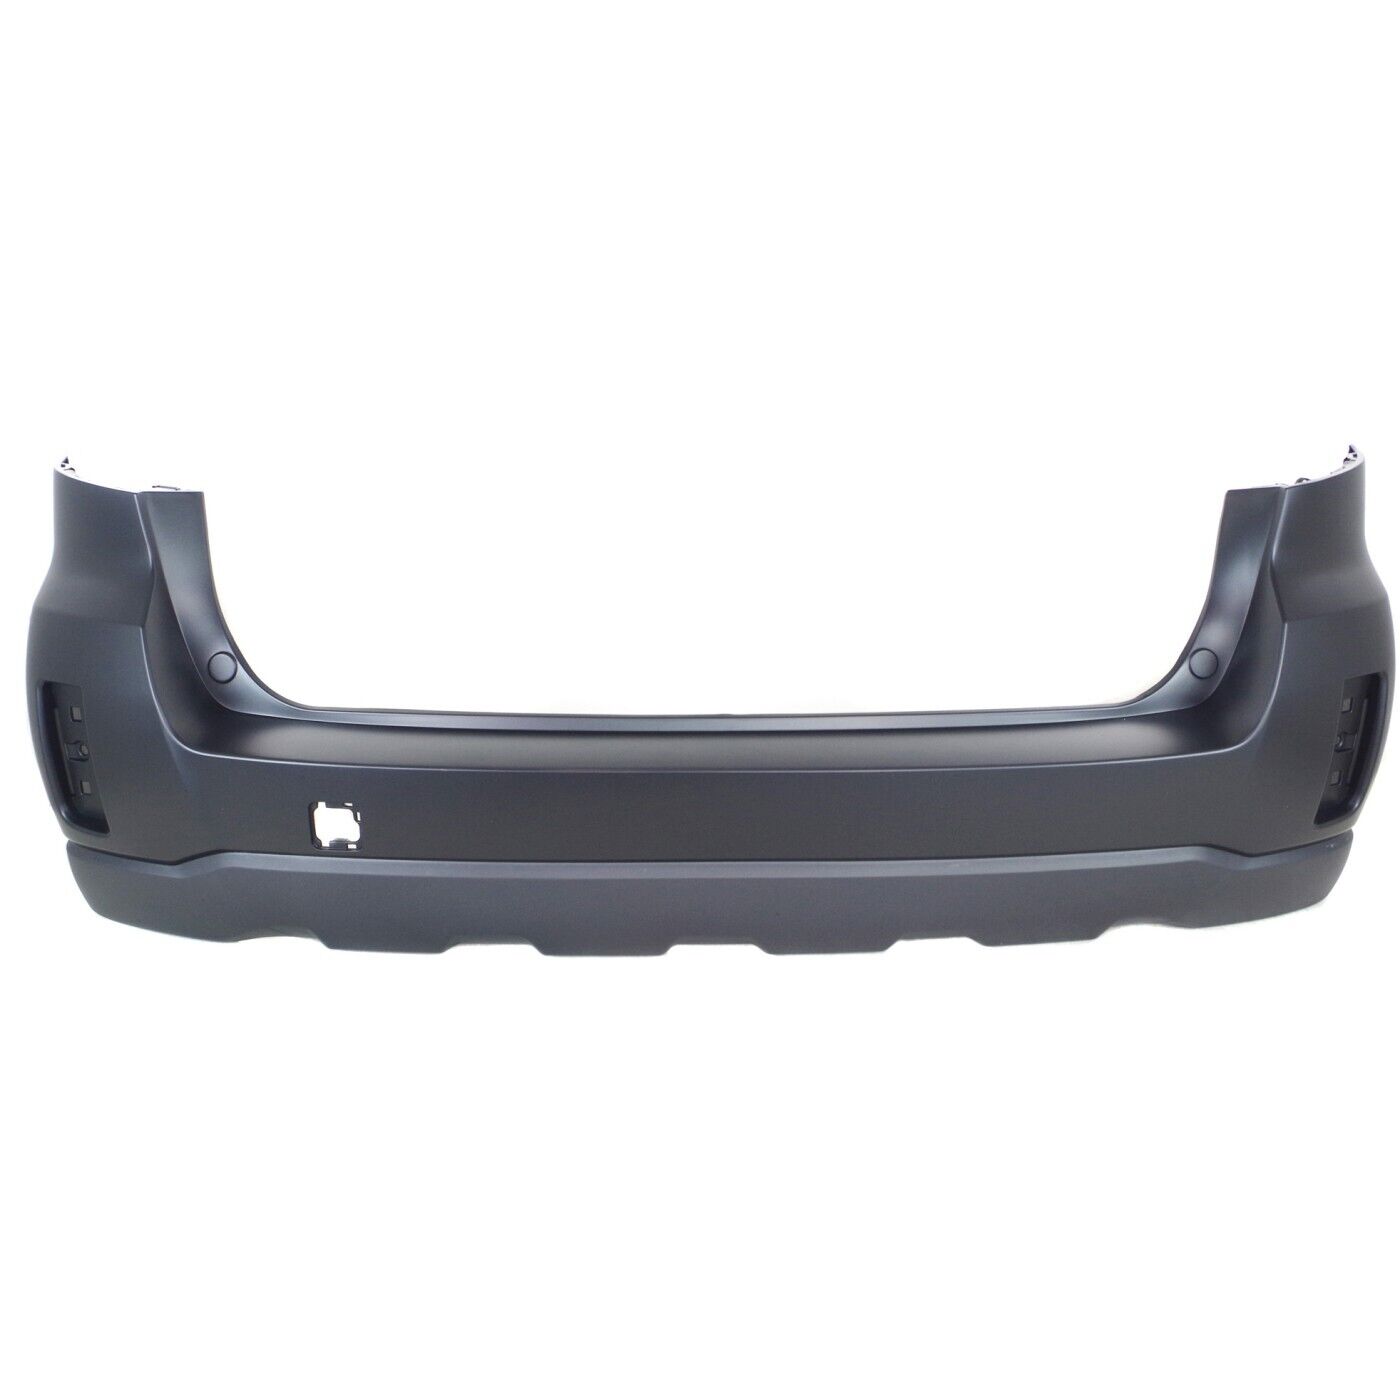 2010-2014 Subaru Outback Rear Bumper Painted to Match